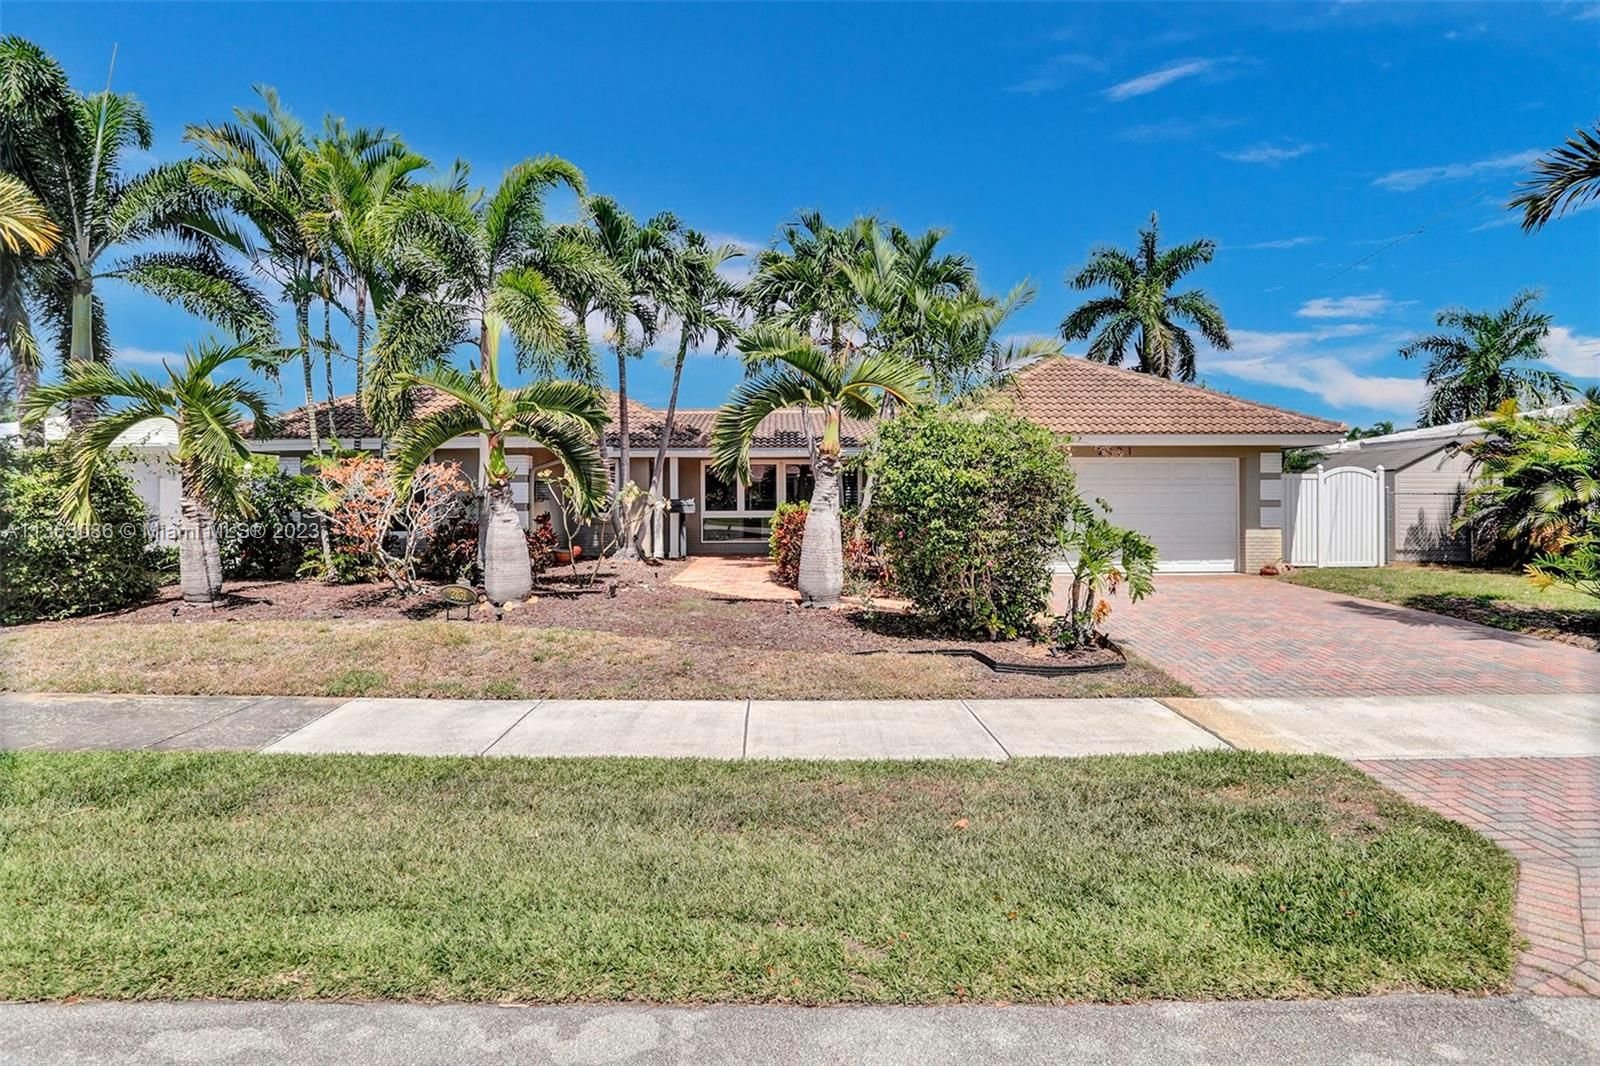 Real estate property located at 2131 57th St, Broward County, Fort Lauderdale, FL